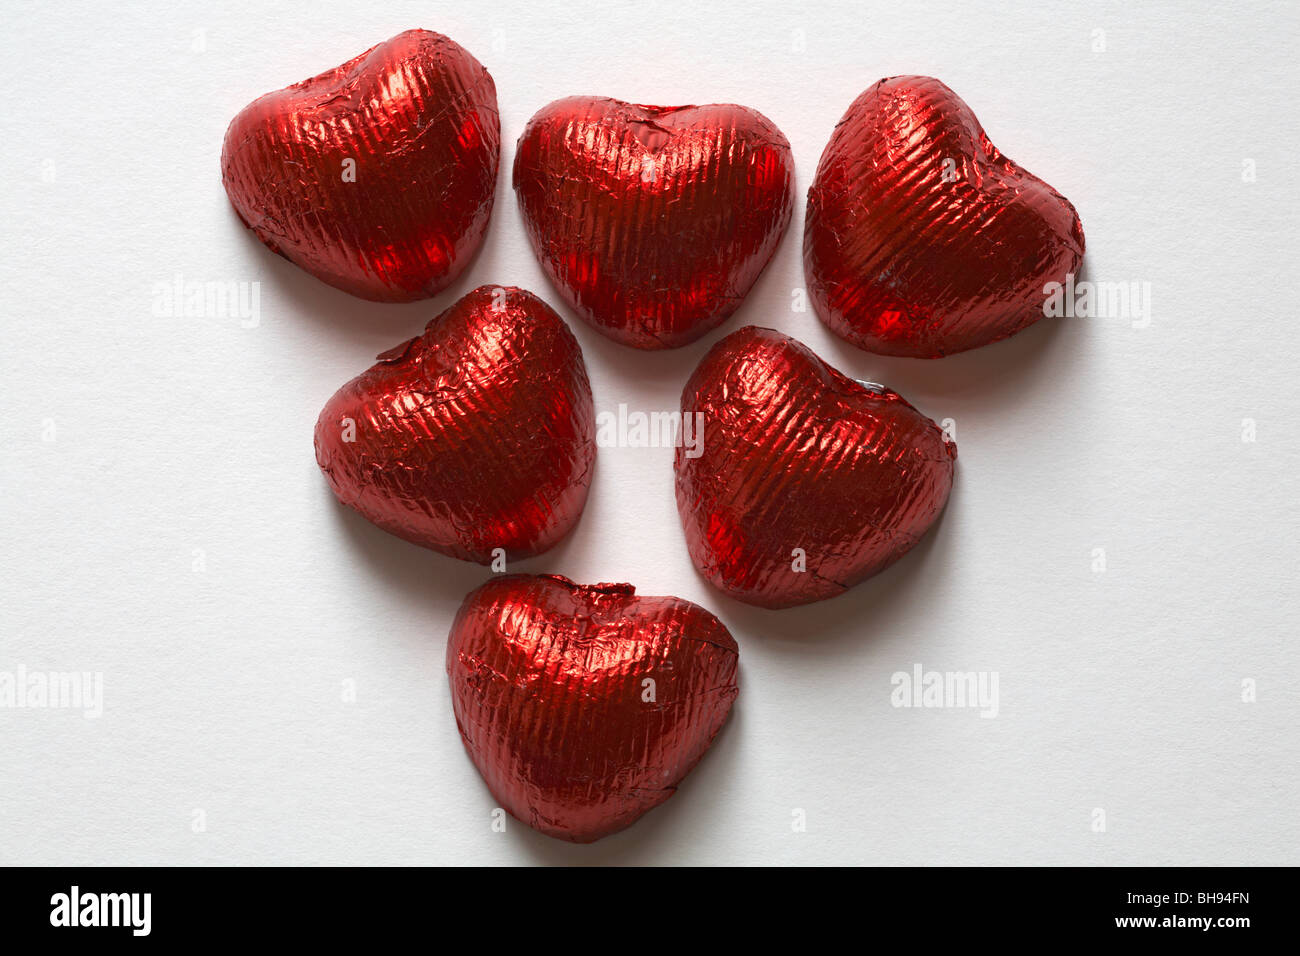 Chocolate Love Hearts Foil Wrapped 